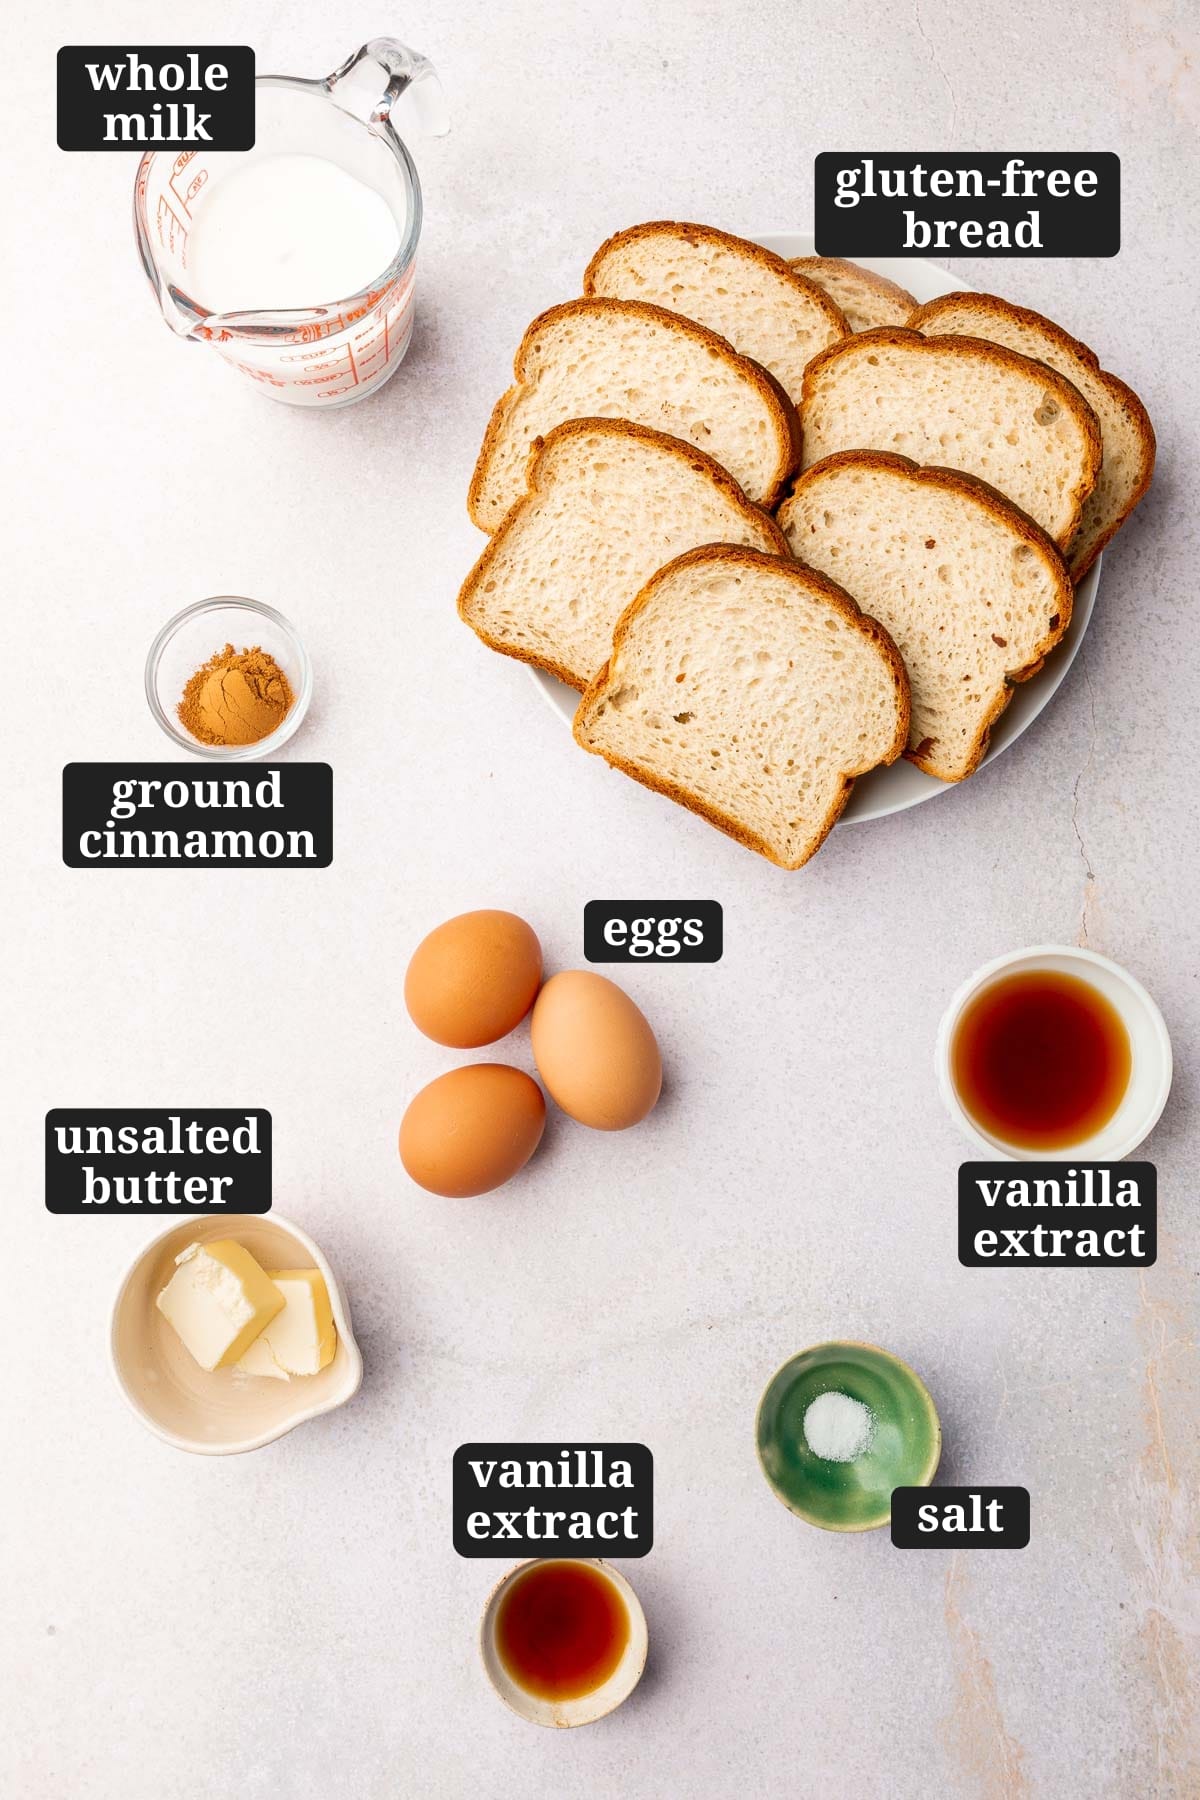 Ingredients in small bowls to make gluten-free french toast, including whole milk, gluten-free bread, ground cinnamon, eggs, vanilla extract, unsalted butter, vanilla extract, and salt with text overlays over each ingredient.